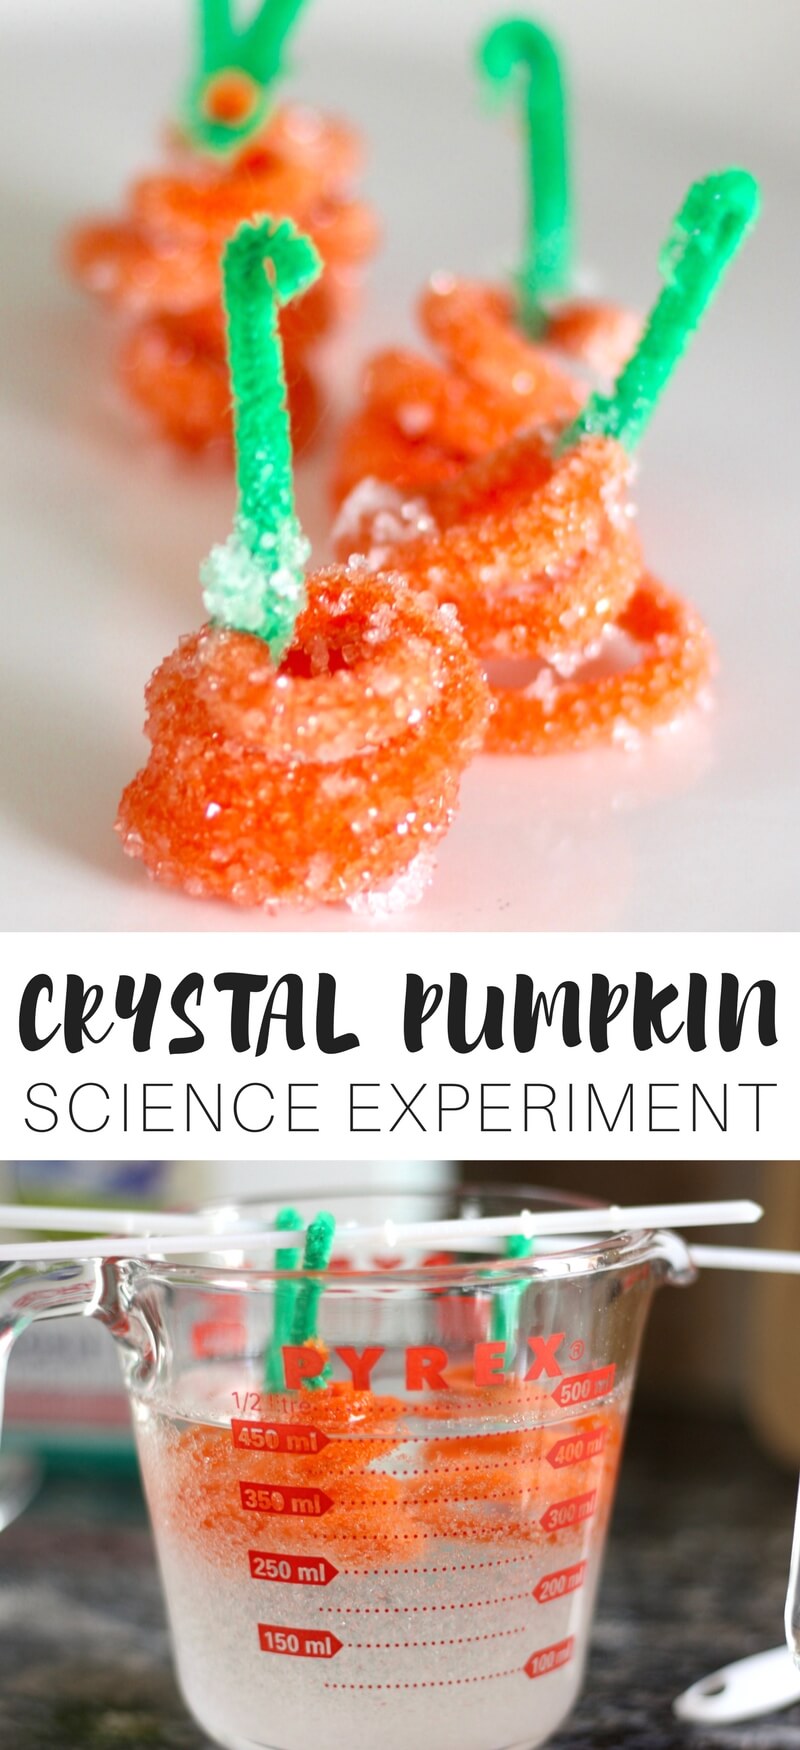 Easy to set up pumpkin crystal science experiment growing borax crystals with kids! Pair this pumpkin themed science activity with a classic book like 5 lLittle Pumpkins Sitting On A Gate! Growing crystals is awesome kid science you can do at home or in the classroom. Fall science, pumpkin science, crystal growing science for preschool, kindergarten, and early elementary age kids.